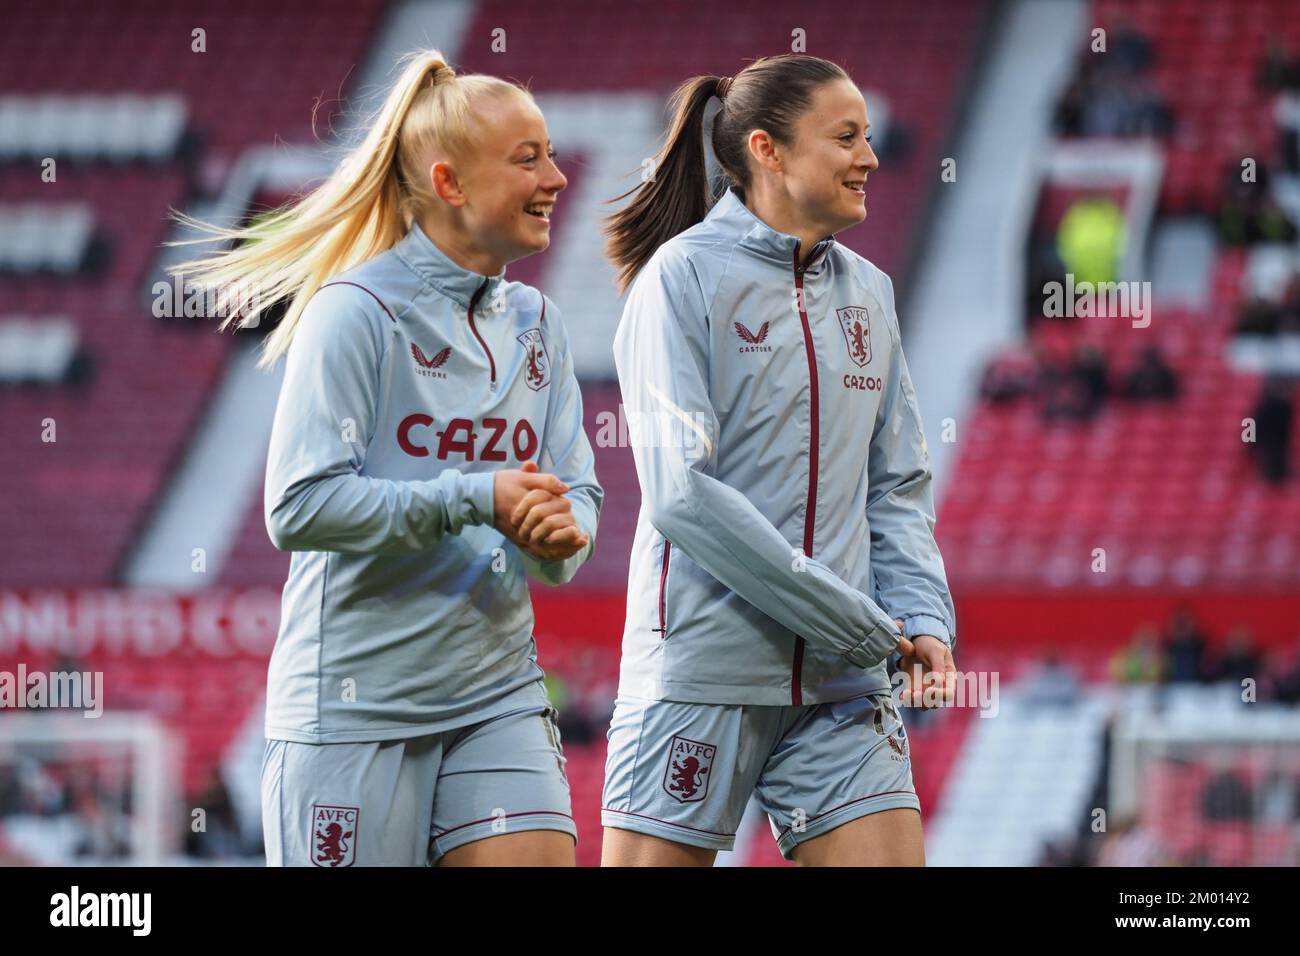 Manchester, UK. 03rd Dec, 2022. Manchester, England, December 3rd 2022: Freya Gregory (18 Aston Villa) and Danielle Turner (14 Aston Villa) warm up during the Barclays FA Womens Super League game between Manchester United and Aston Villa at Old Trafford in Manchester, England (Natalie Mincher/SPP) Credit: SPP Sport Press Photo. /Alamy Live News Stock Photo